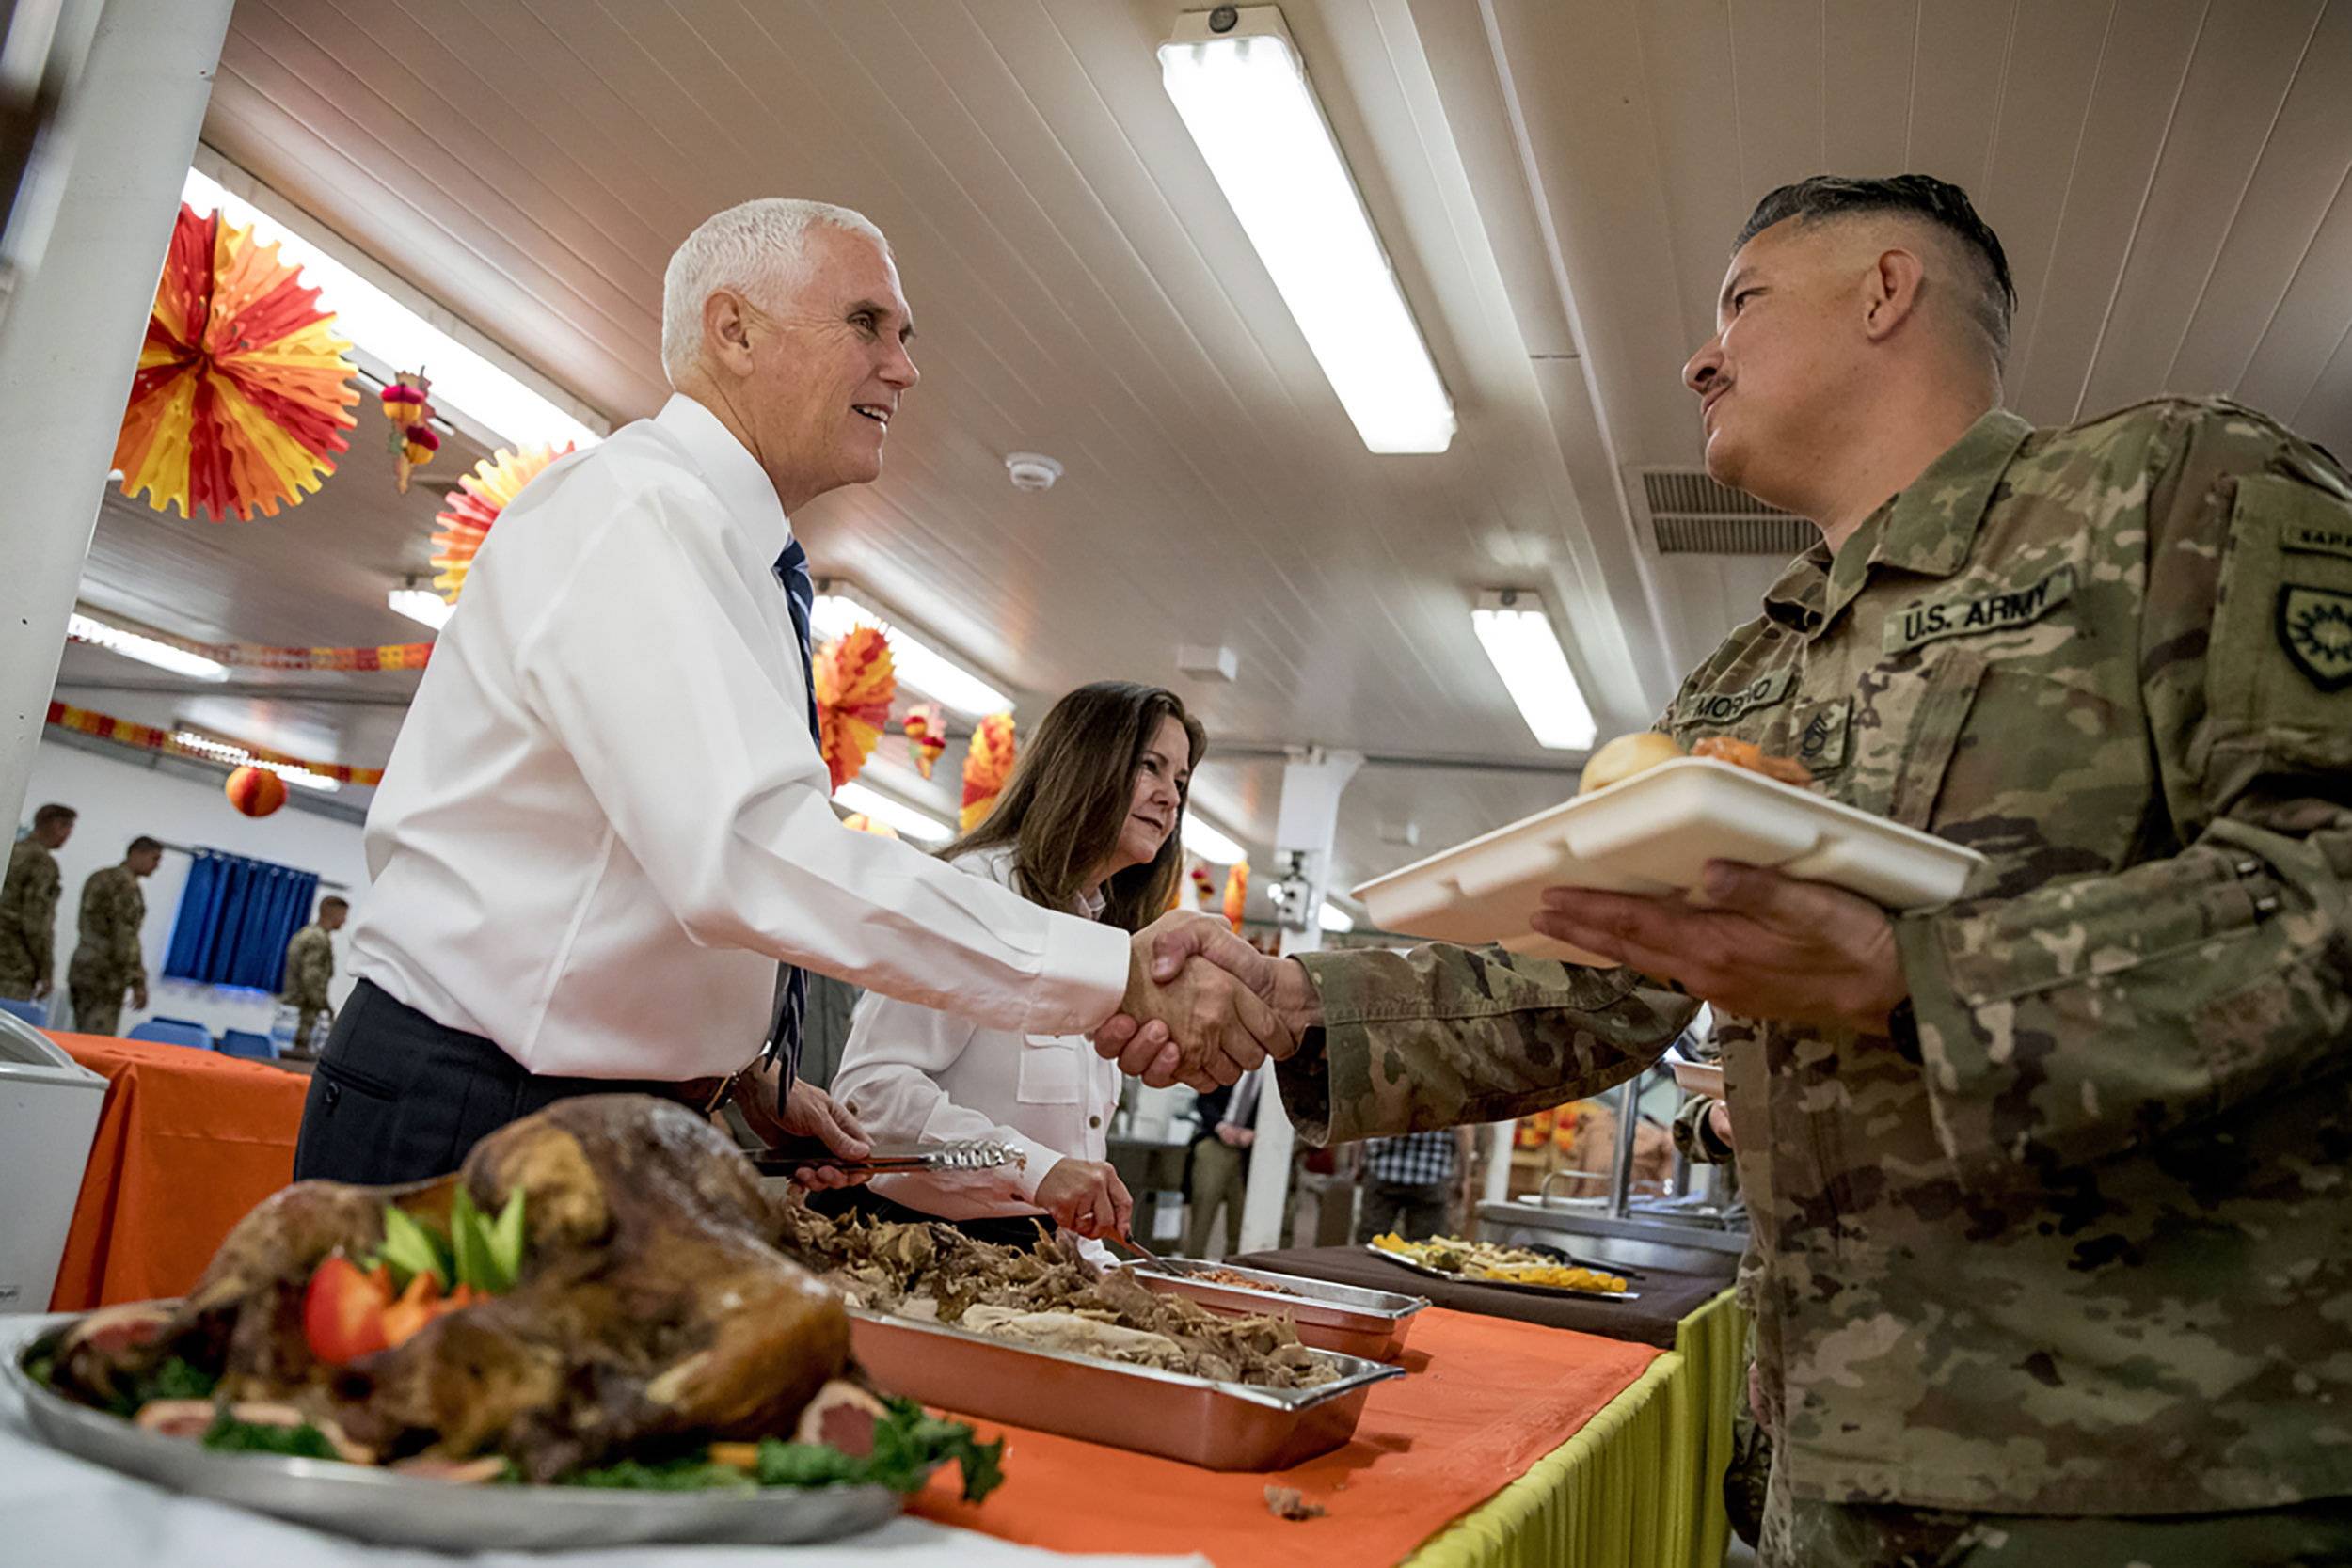 Photo: Andrew Harnik/AP. Caption: Vice President Mike Pence and his wife Karen Pence, second from left, serve turkey to troops at Al Asad Air Base, Iraq, Saturday, Nov. 23, 2019.